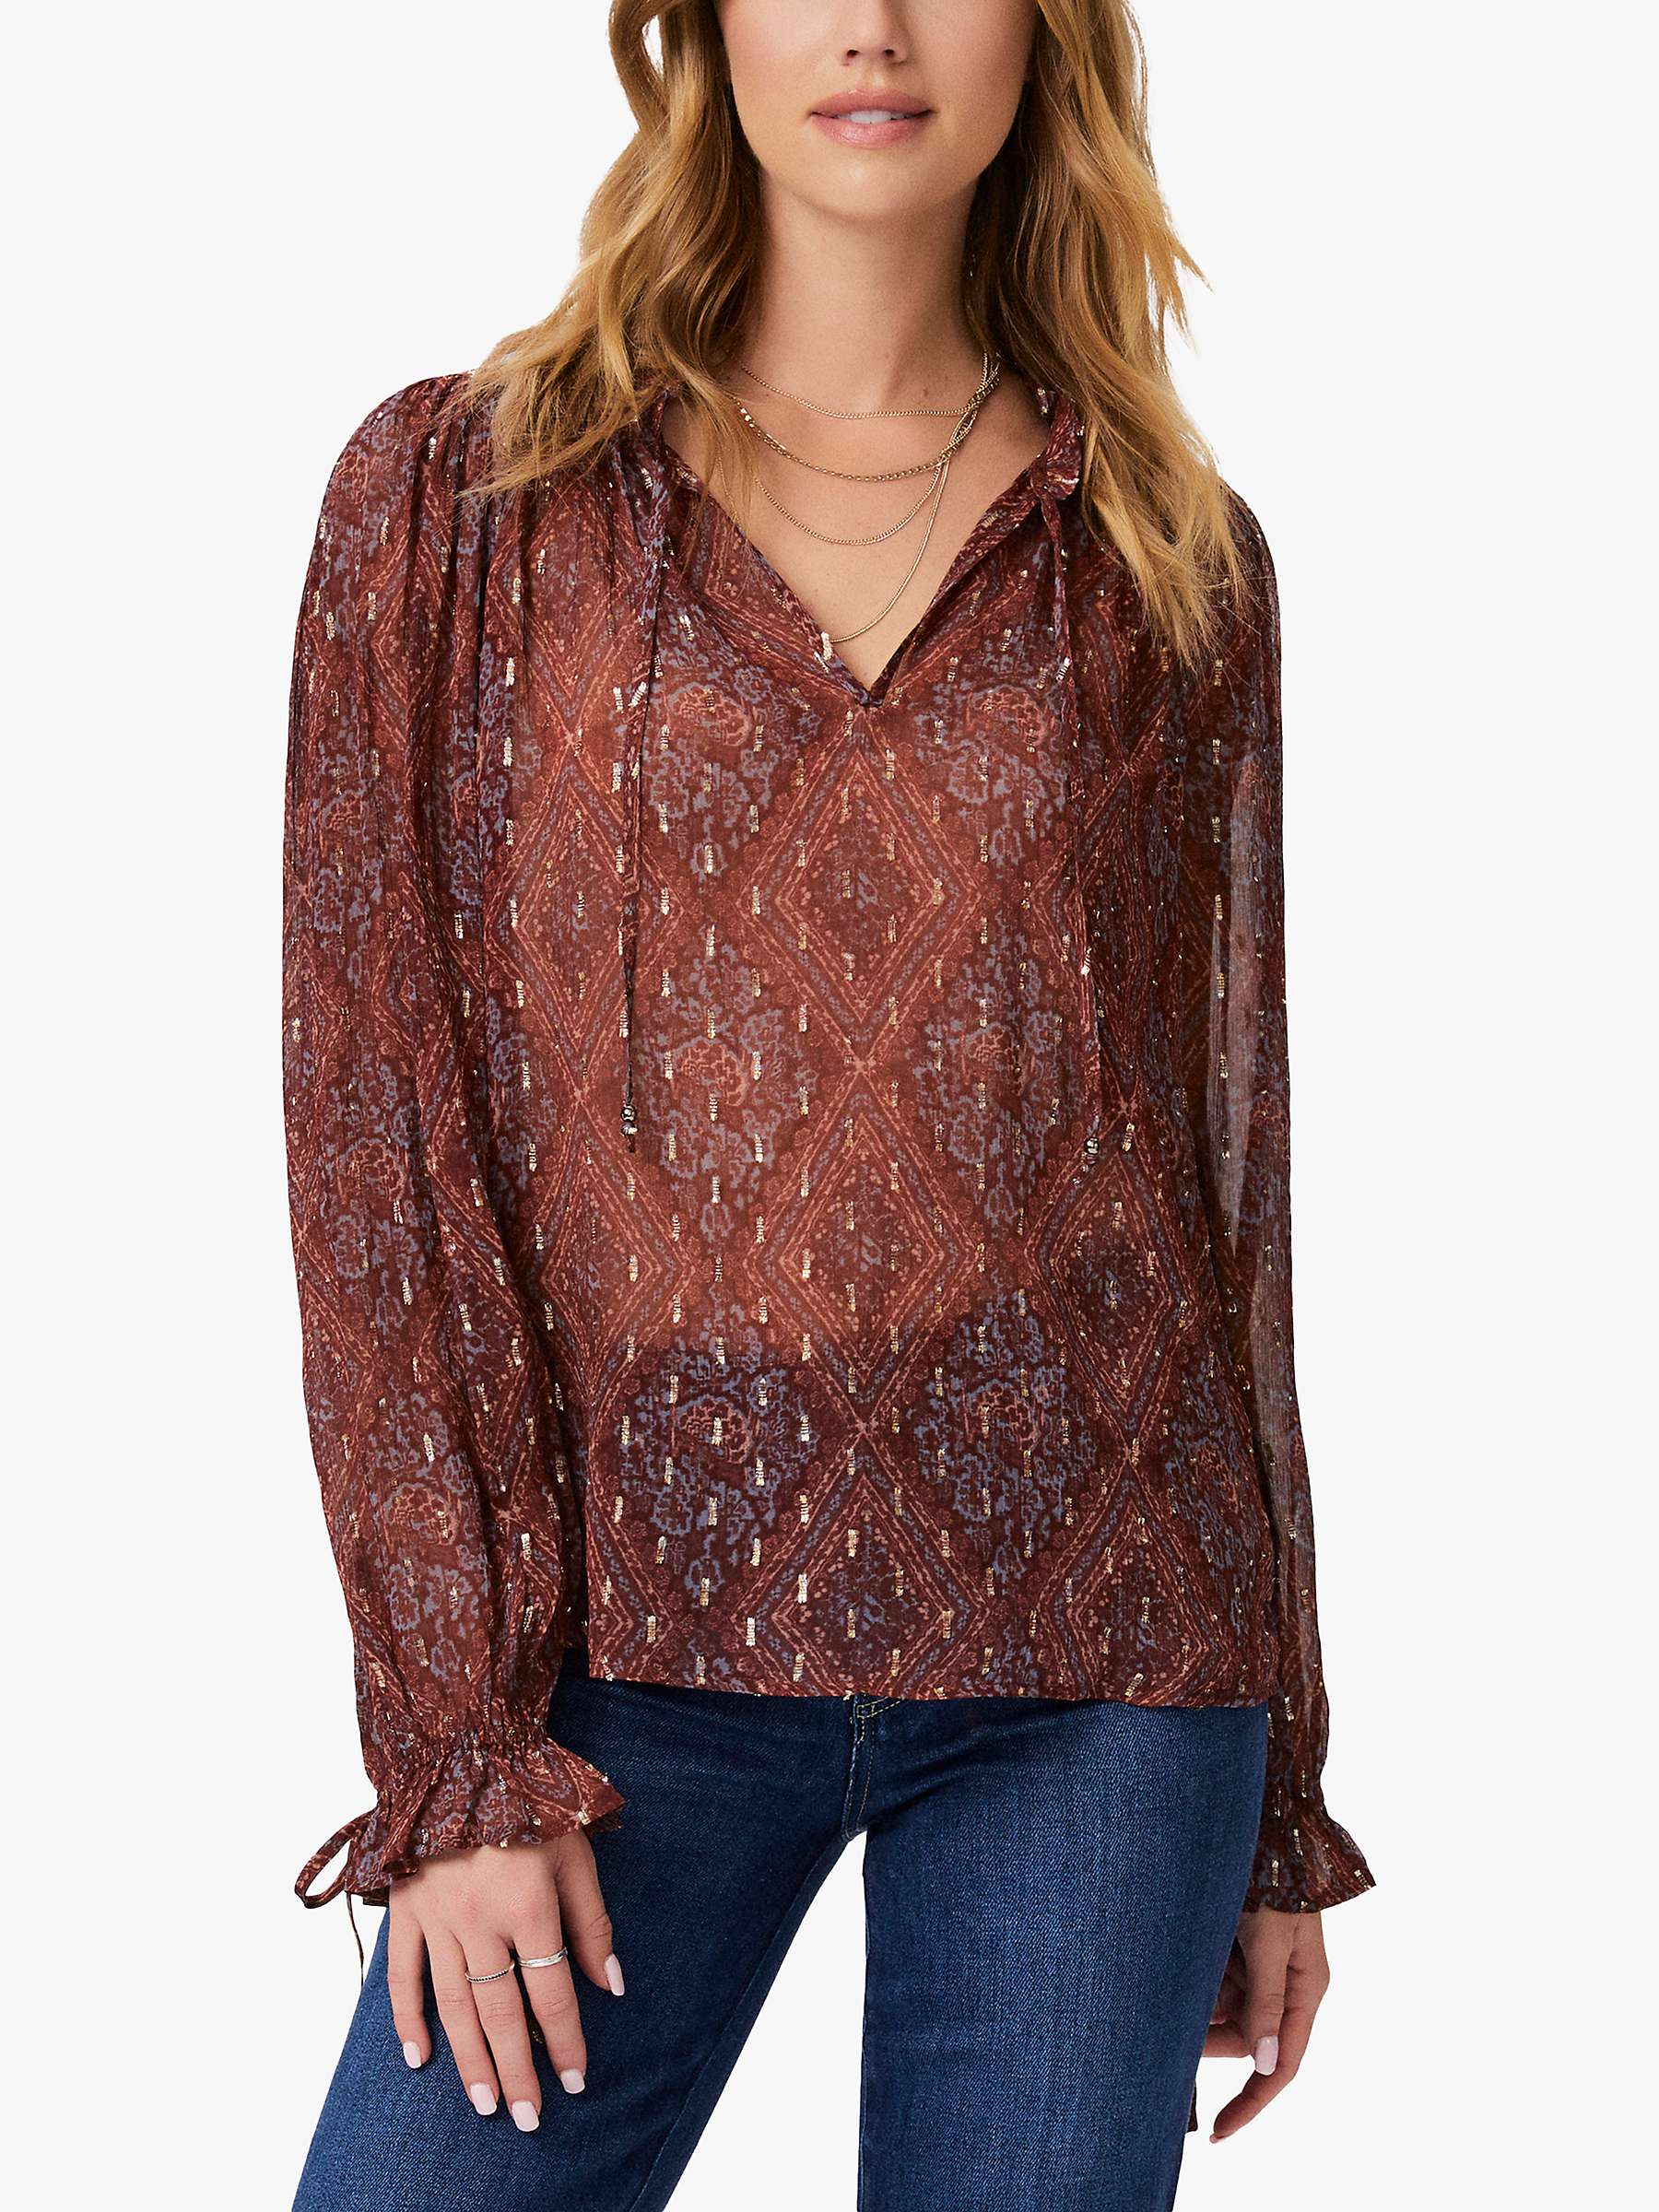 Buy PAIGE Fia Tapestry Print Blouse, Iced Slate/Multi Online at johnlewis.com